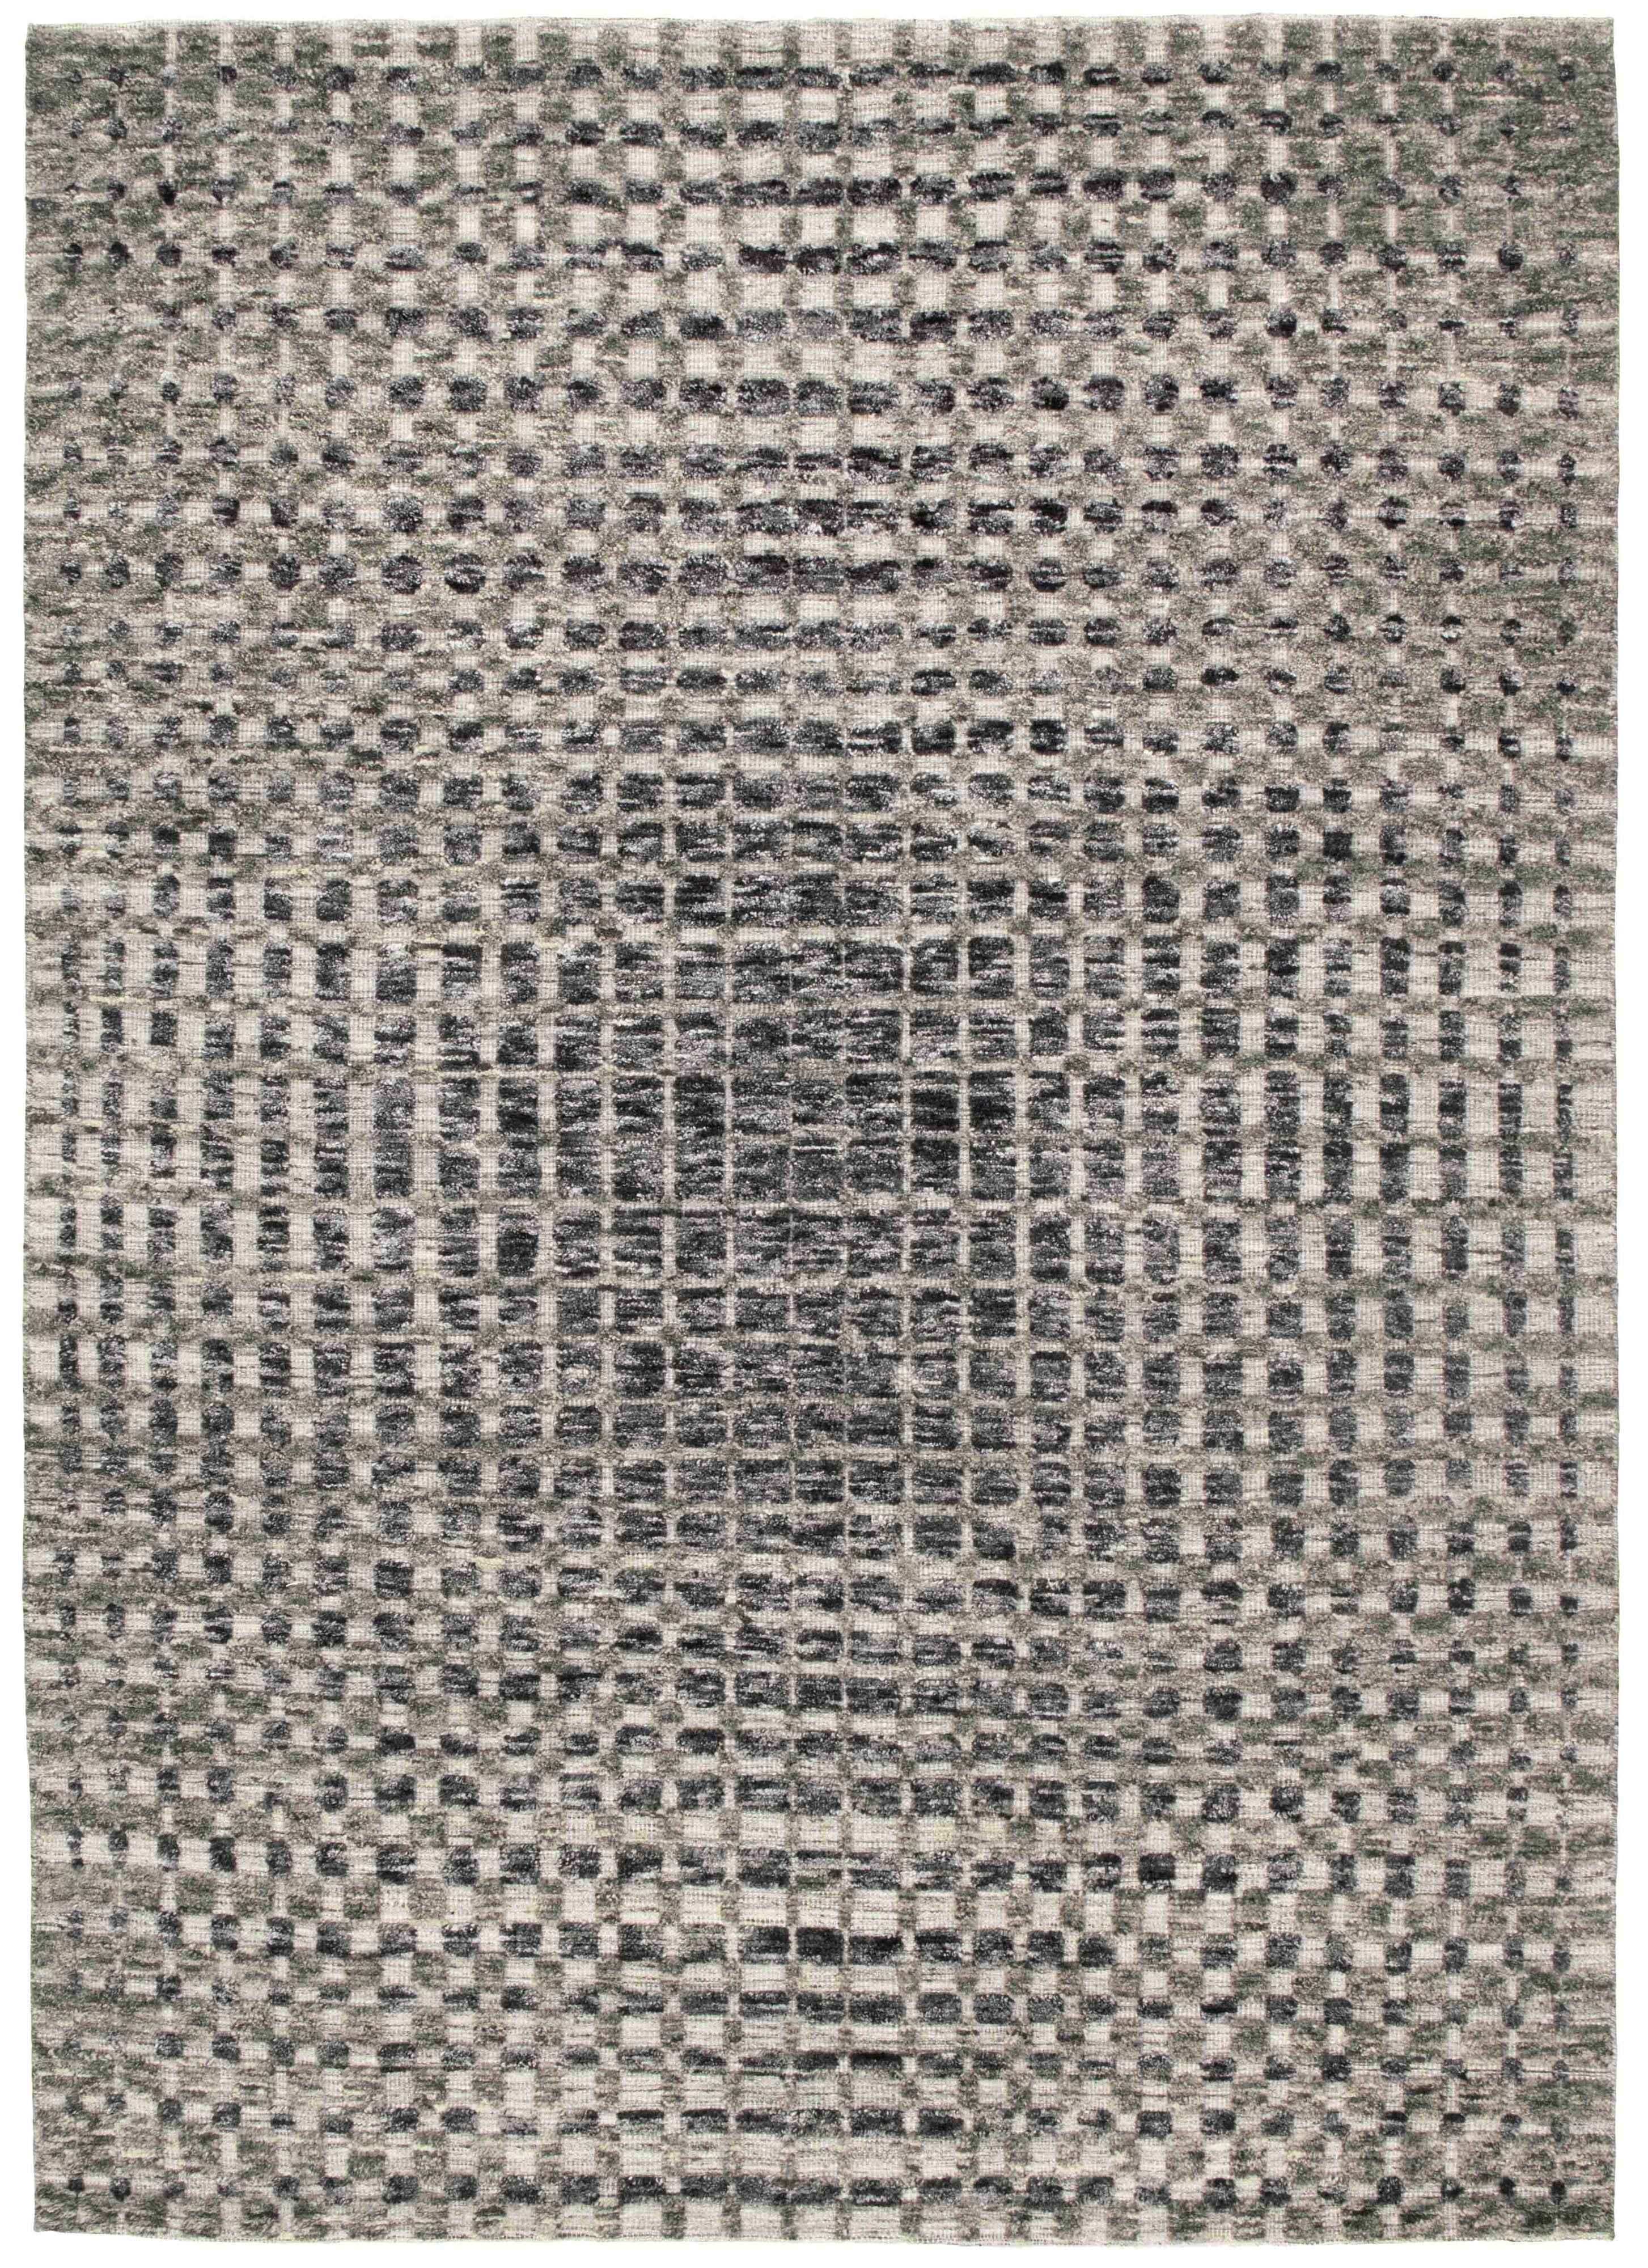 350 x 350 cm Indian Wool Black Rug-Cliff, Charcoal - Rugmaster